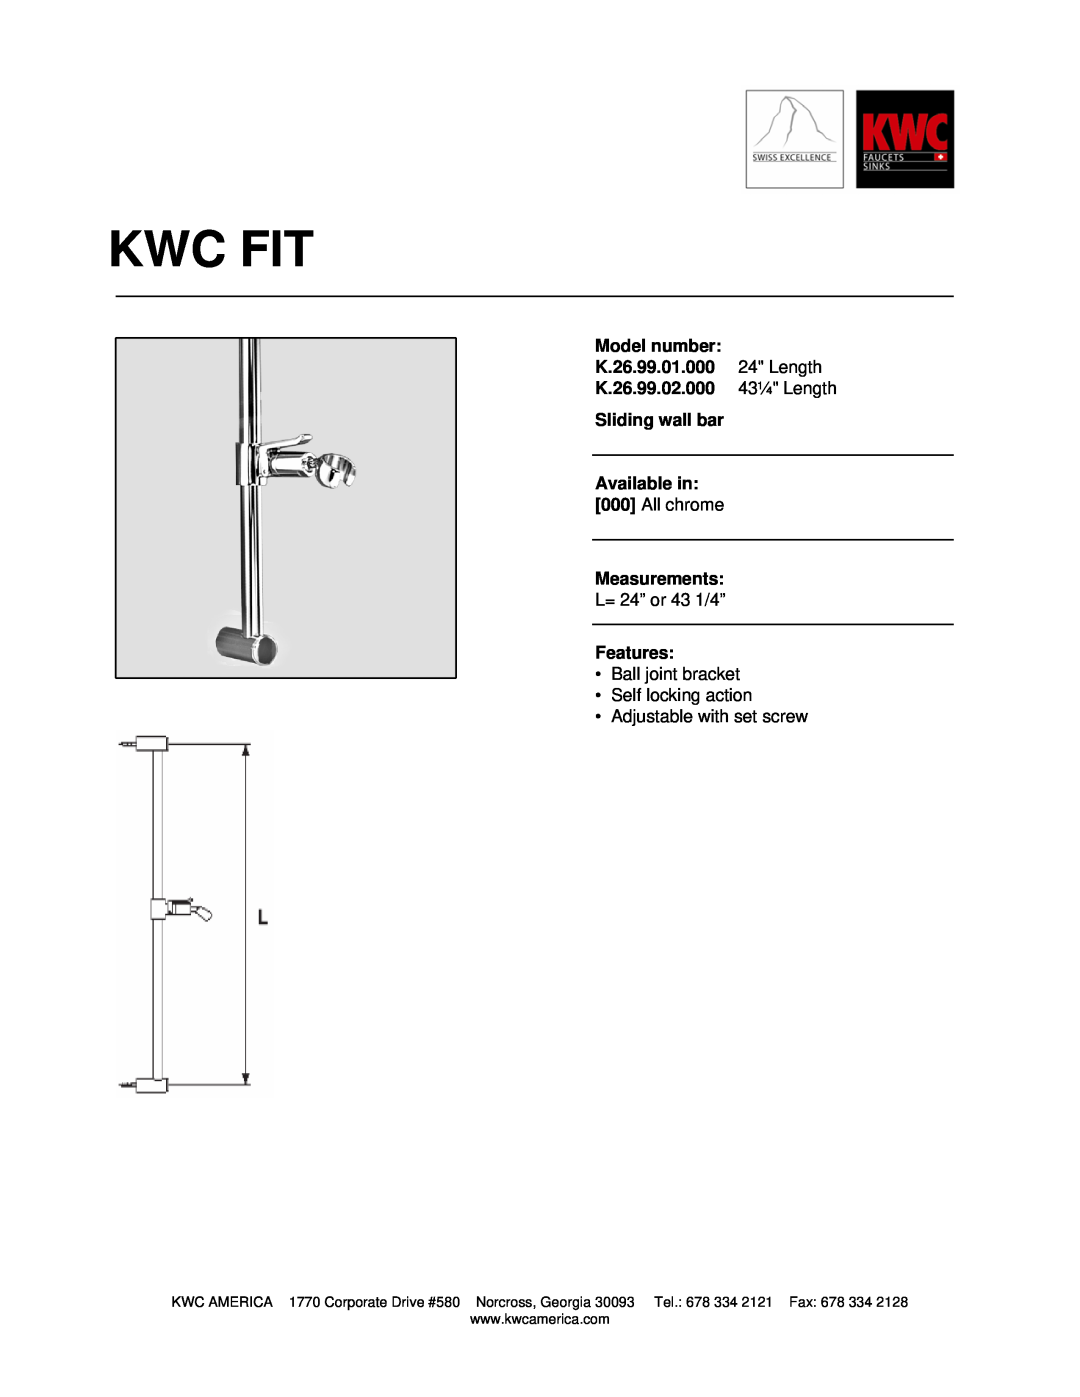 KWC K.26.99.01.000 manual Kwc Fit, Model number, K.26.99.02.000, Sliding wall bar, Available in, Measurements, Features 